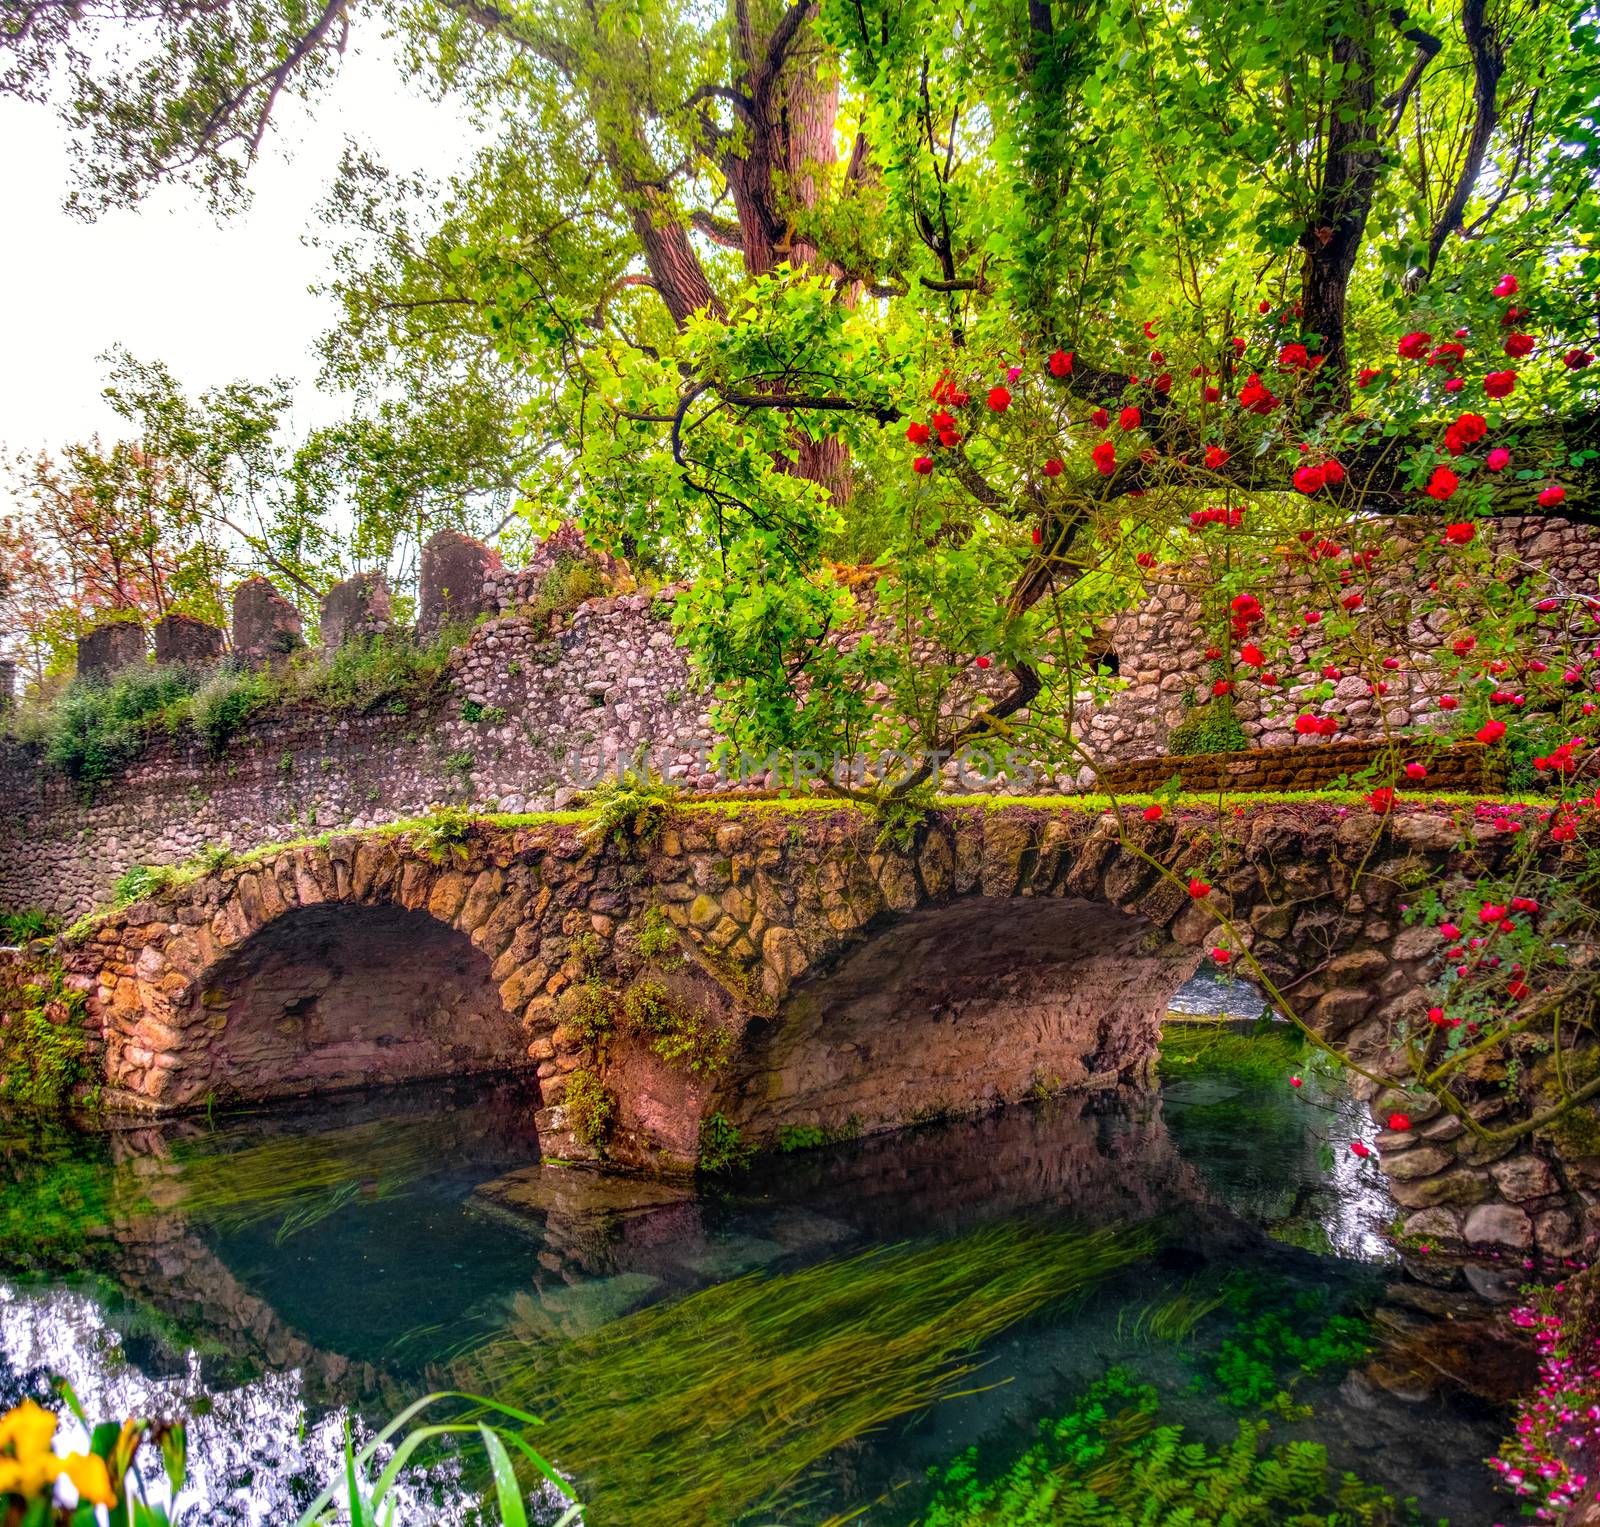 medieval stone bridge in eden colourful garden vibrant with roses and river .